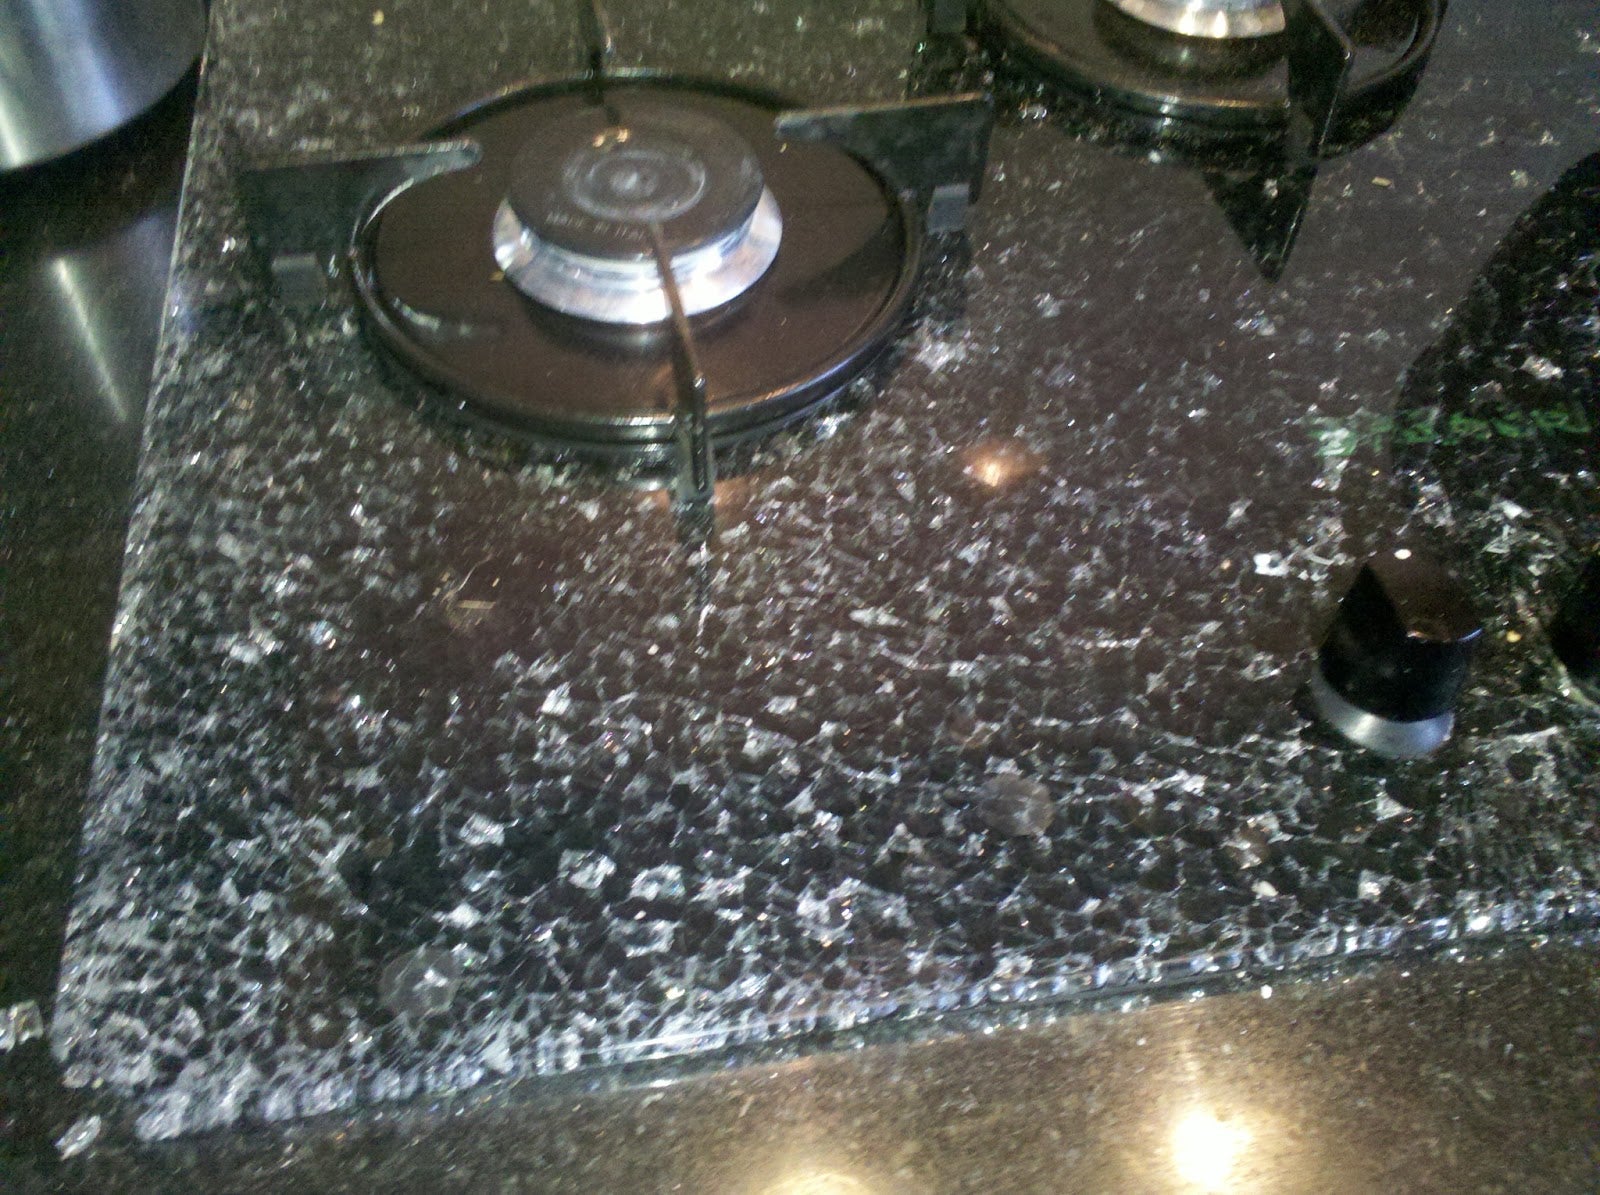 Glass-Top Stove Suddenly Shatters When Not In Use, Shards Fly 5 Metres Into Living Room - WORLD OF BUZZ 1